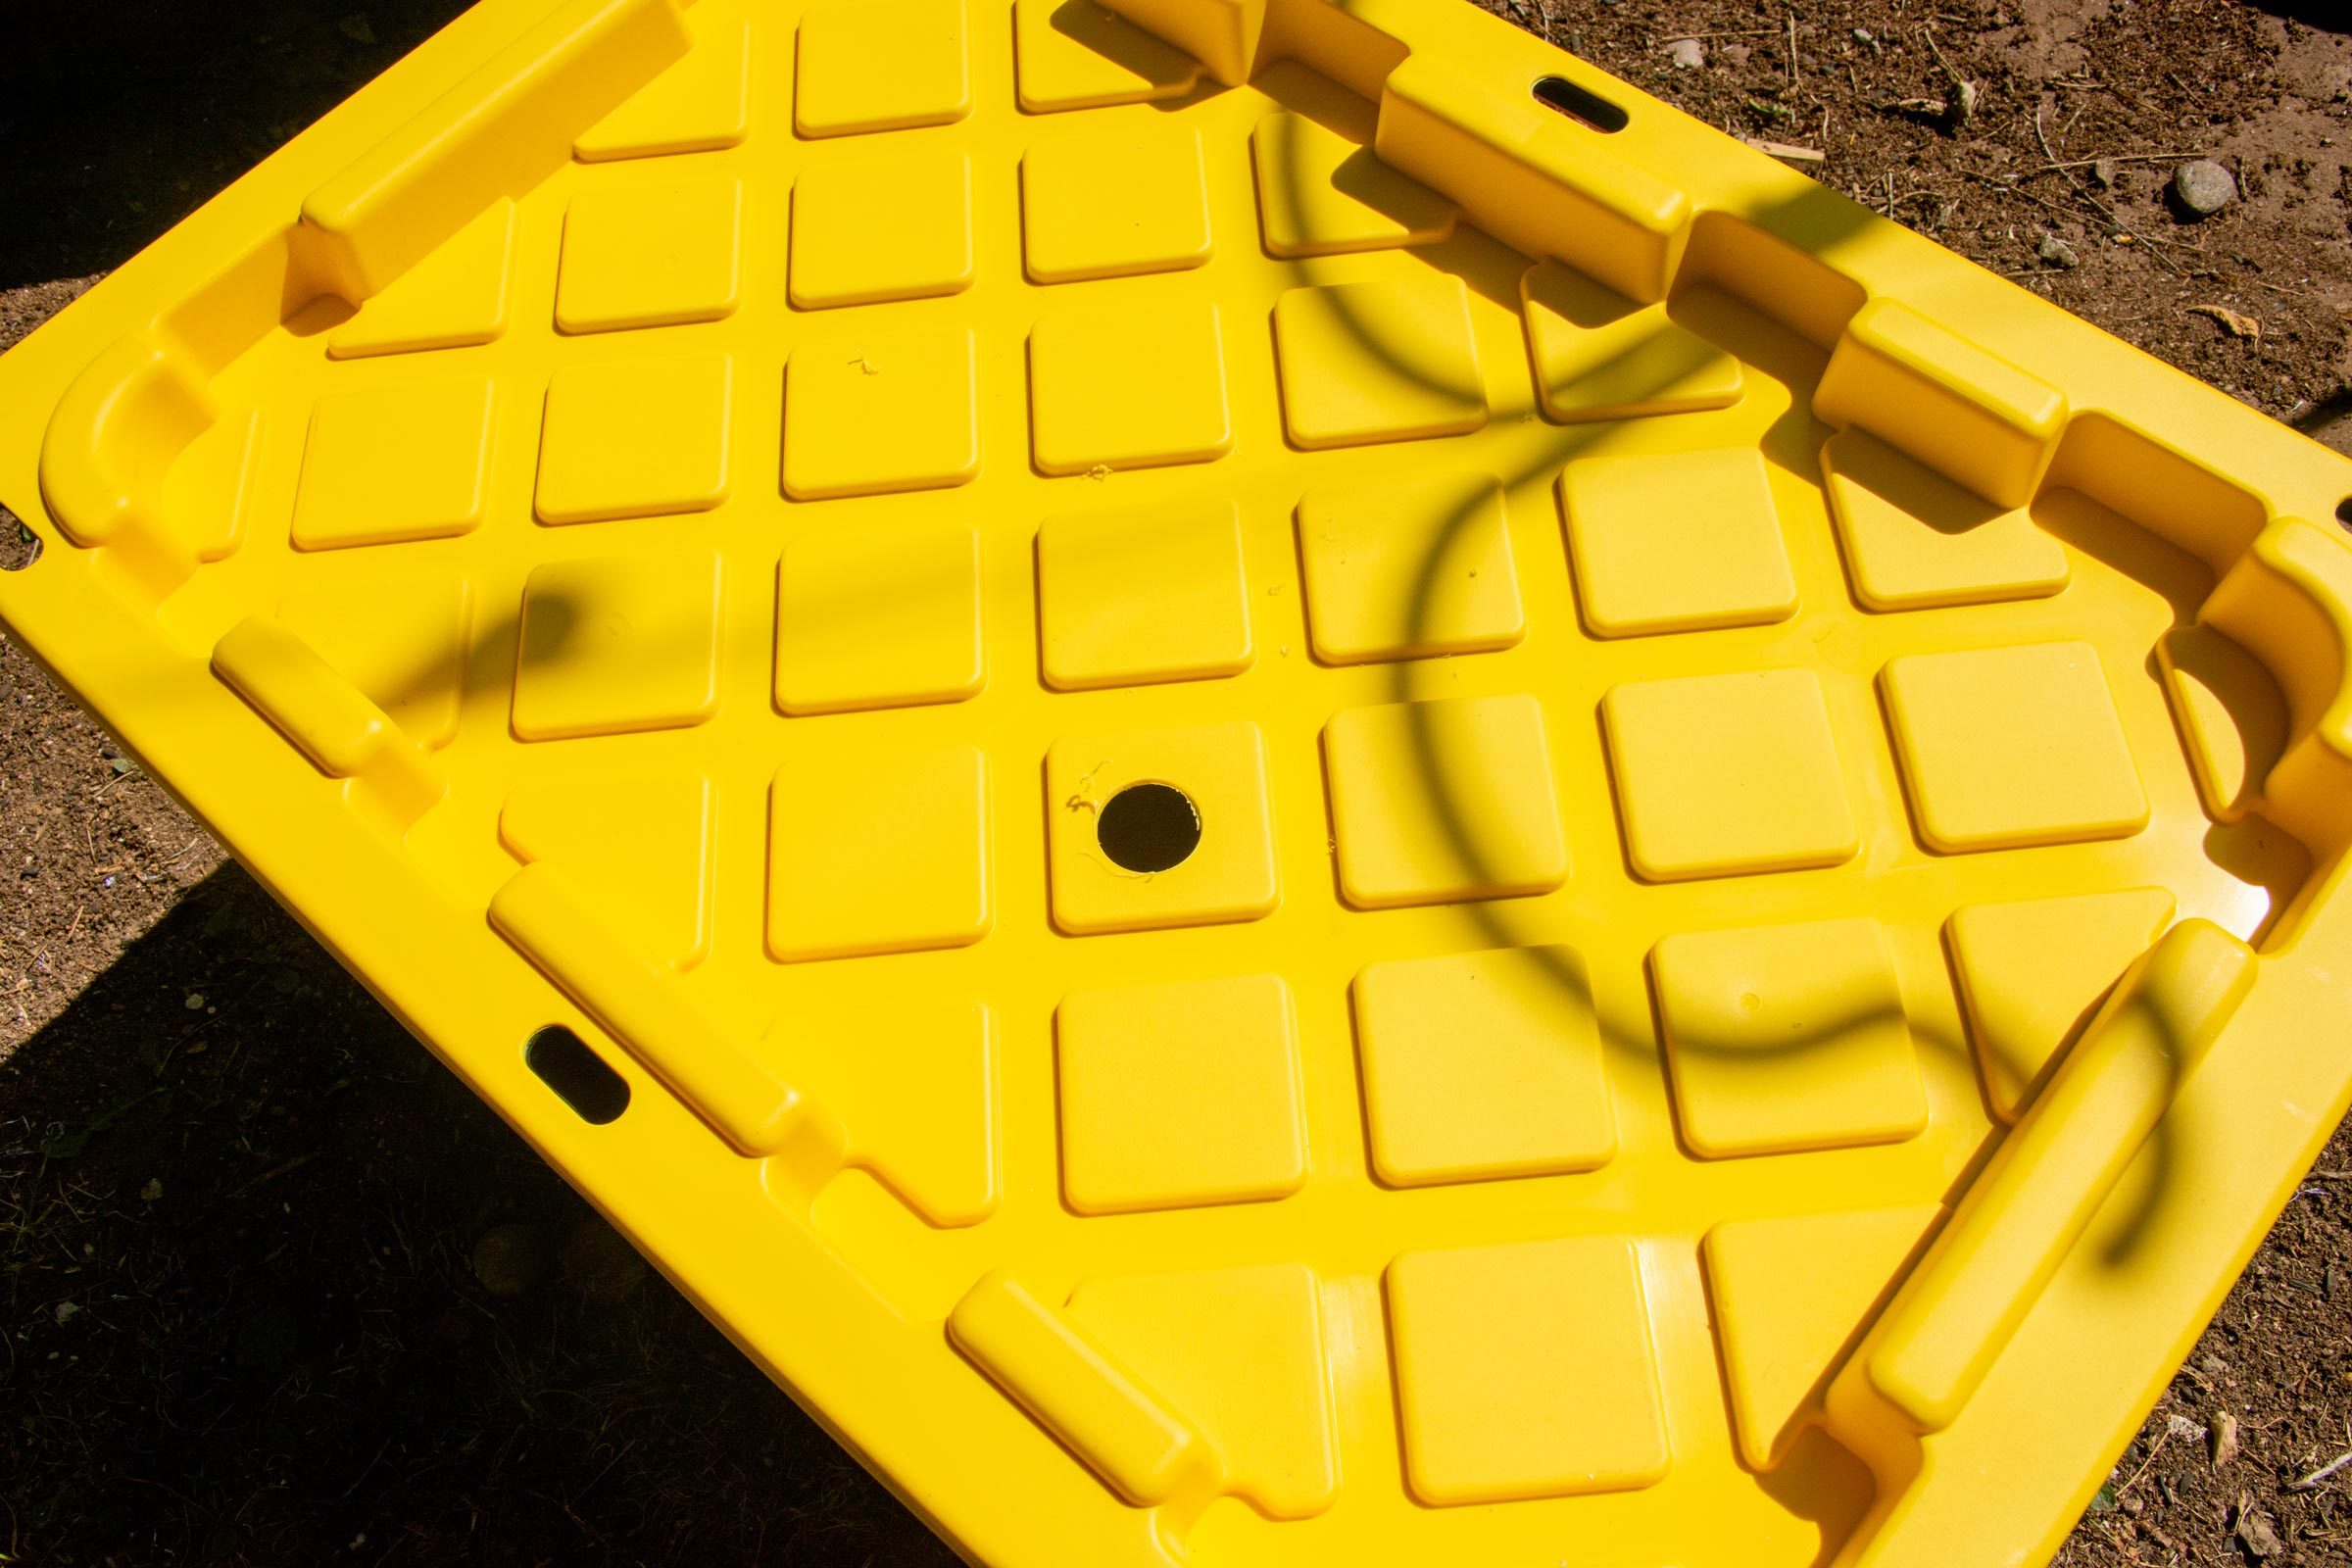 a round hole drilled in the yellow lid of a plastic tote